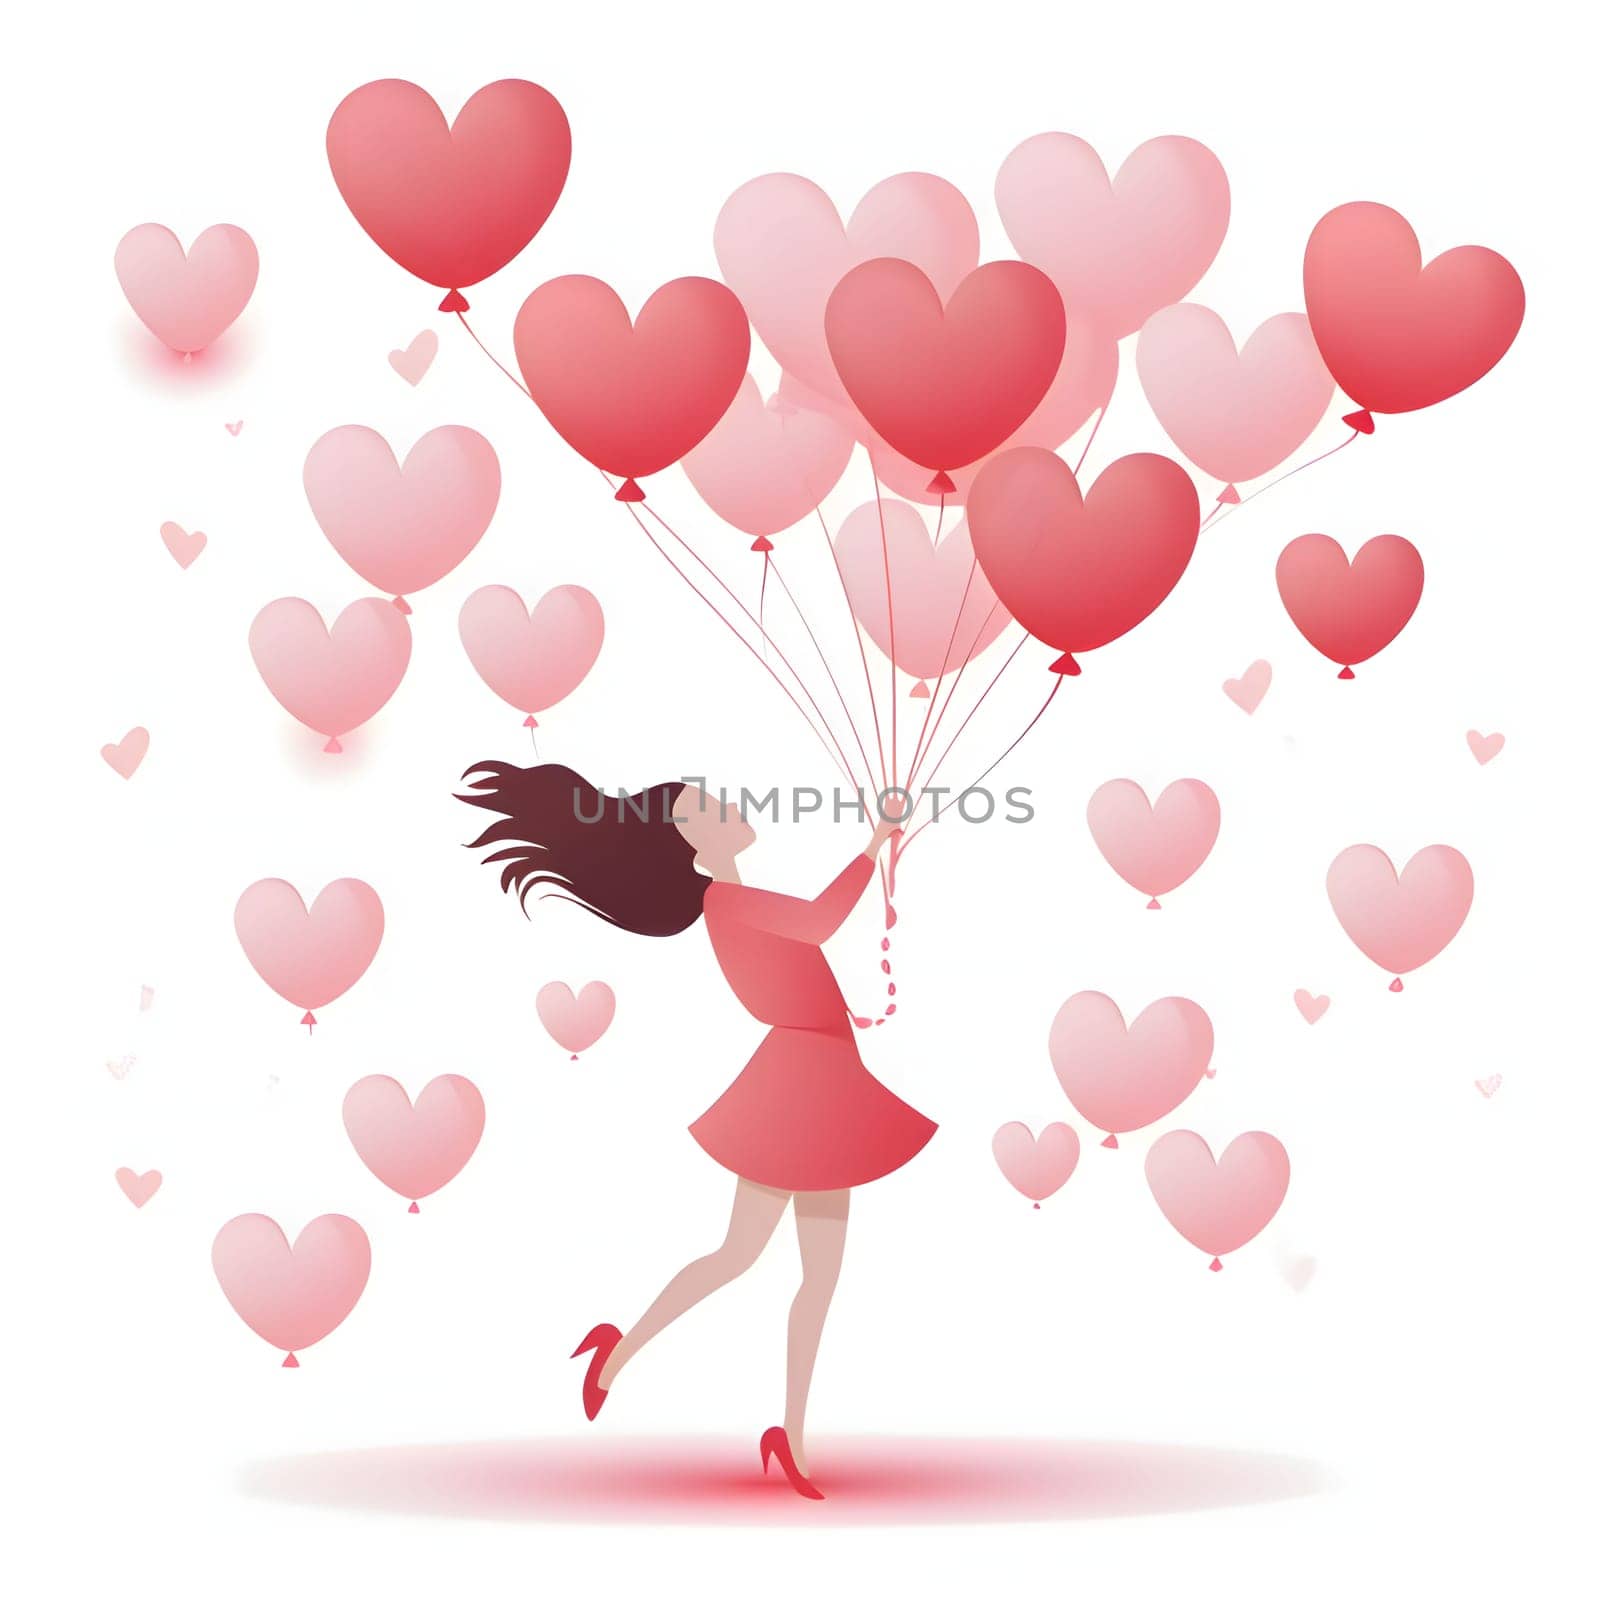 Woman holding heart-shaped balloons in her hand. Illustration on a white isolated background. Heart as a symbol of affection and love. The time of falling in love and love.